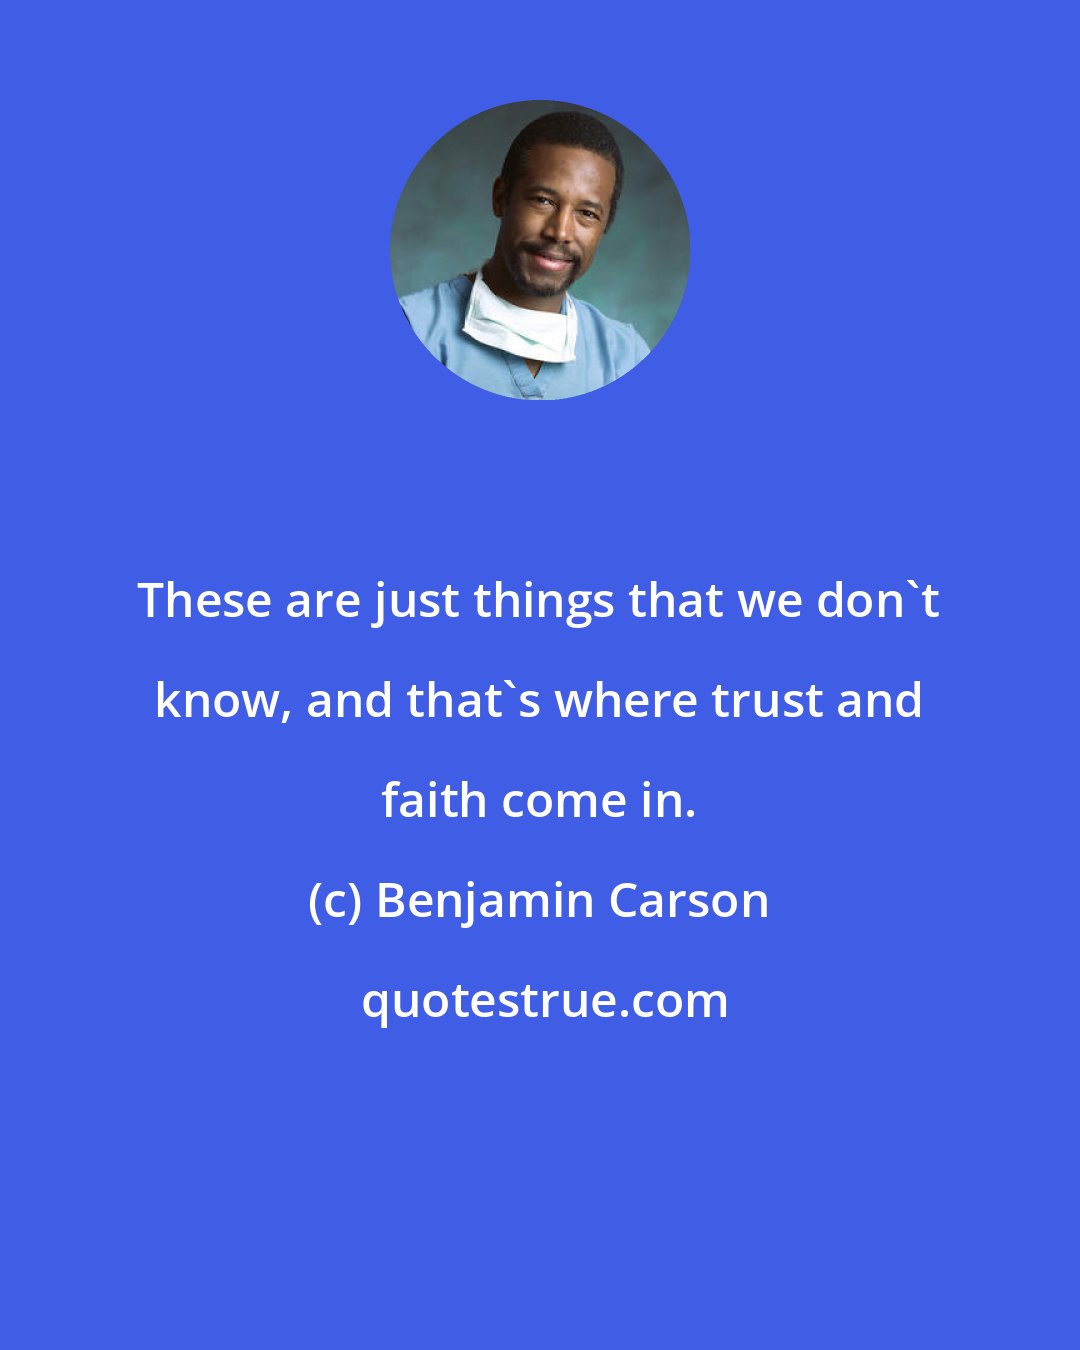 Benjamin Carson: These are just things that we don't know, and that's where trust and faith come in.